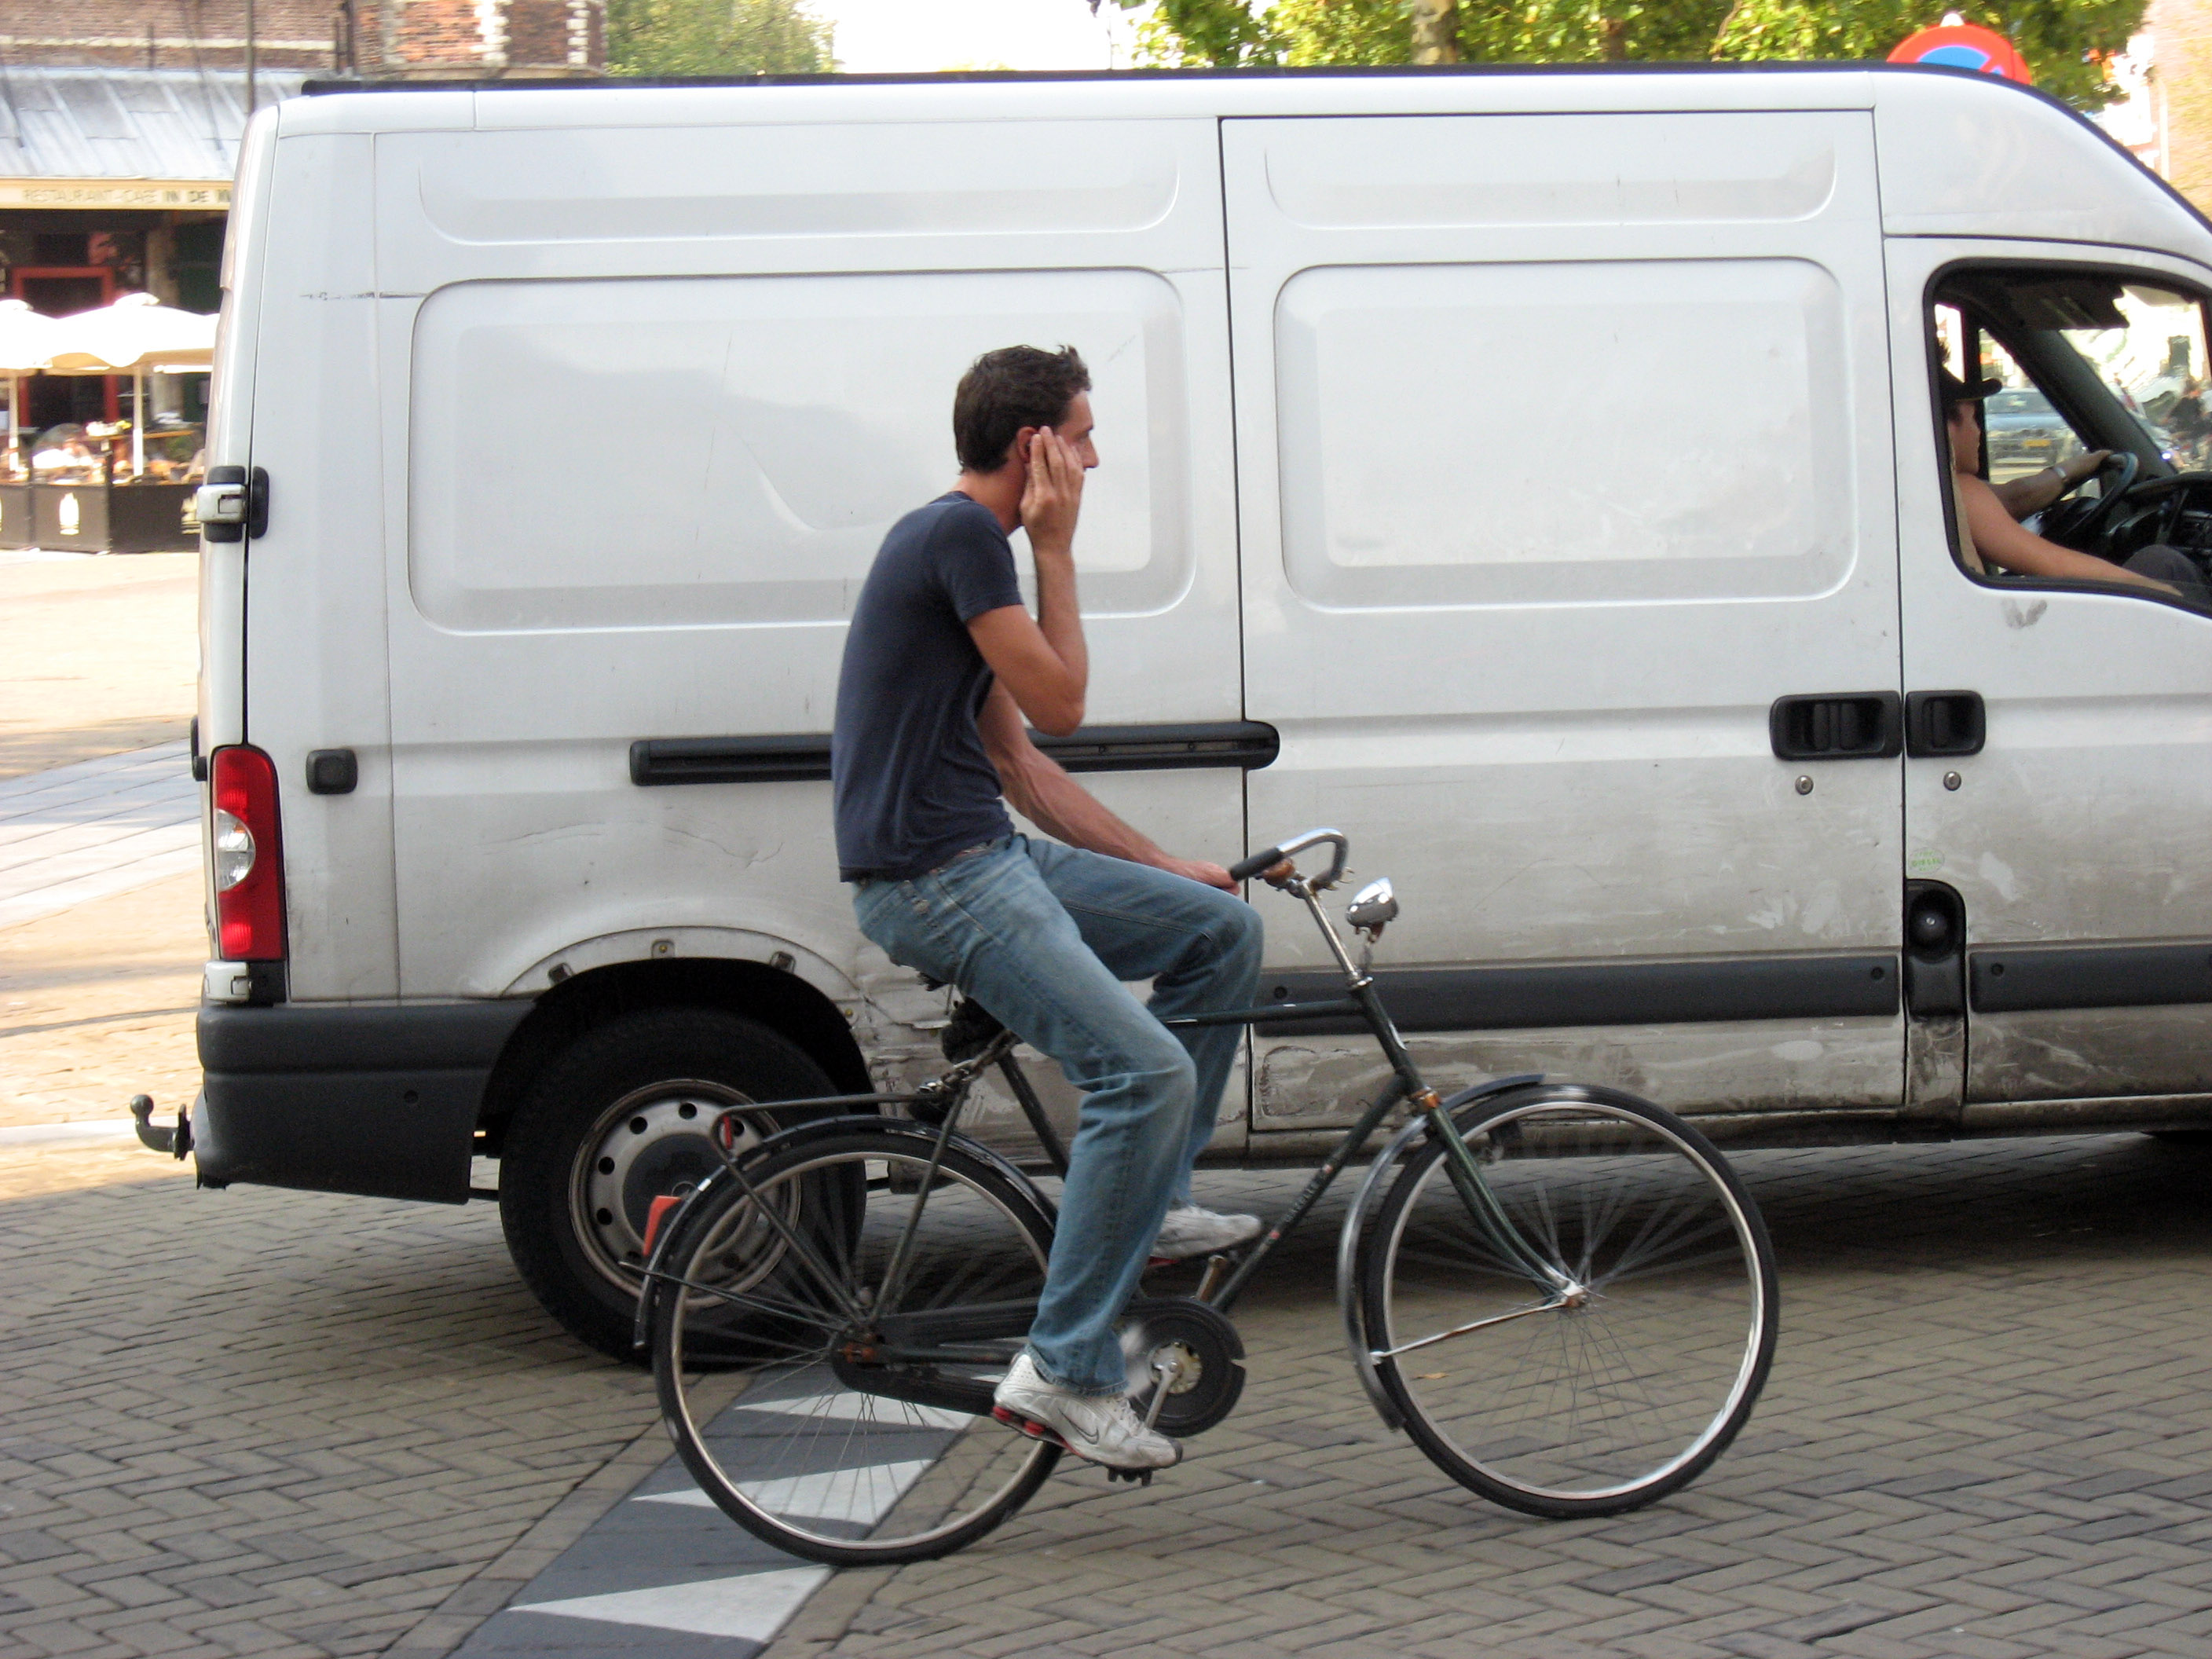 his bicycle in Amsterdam.